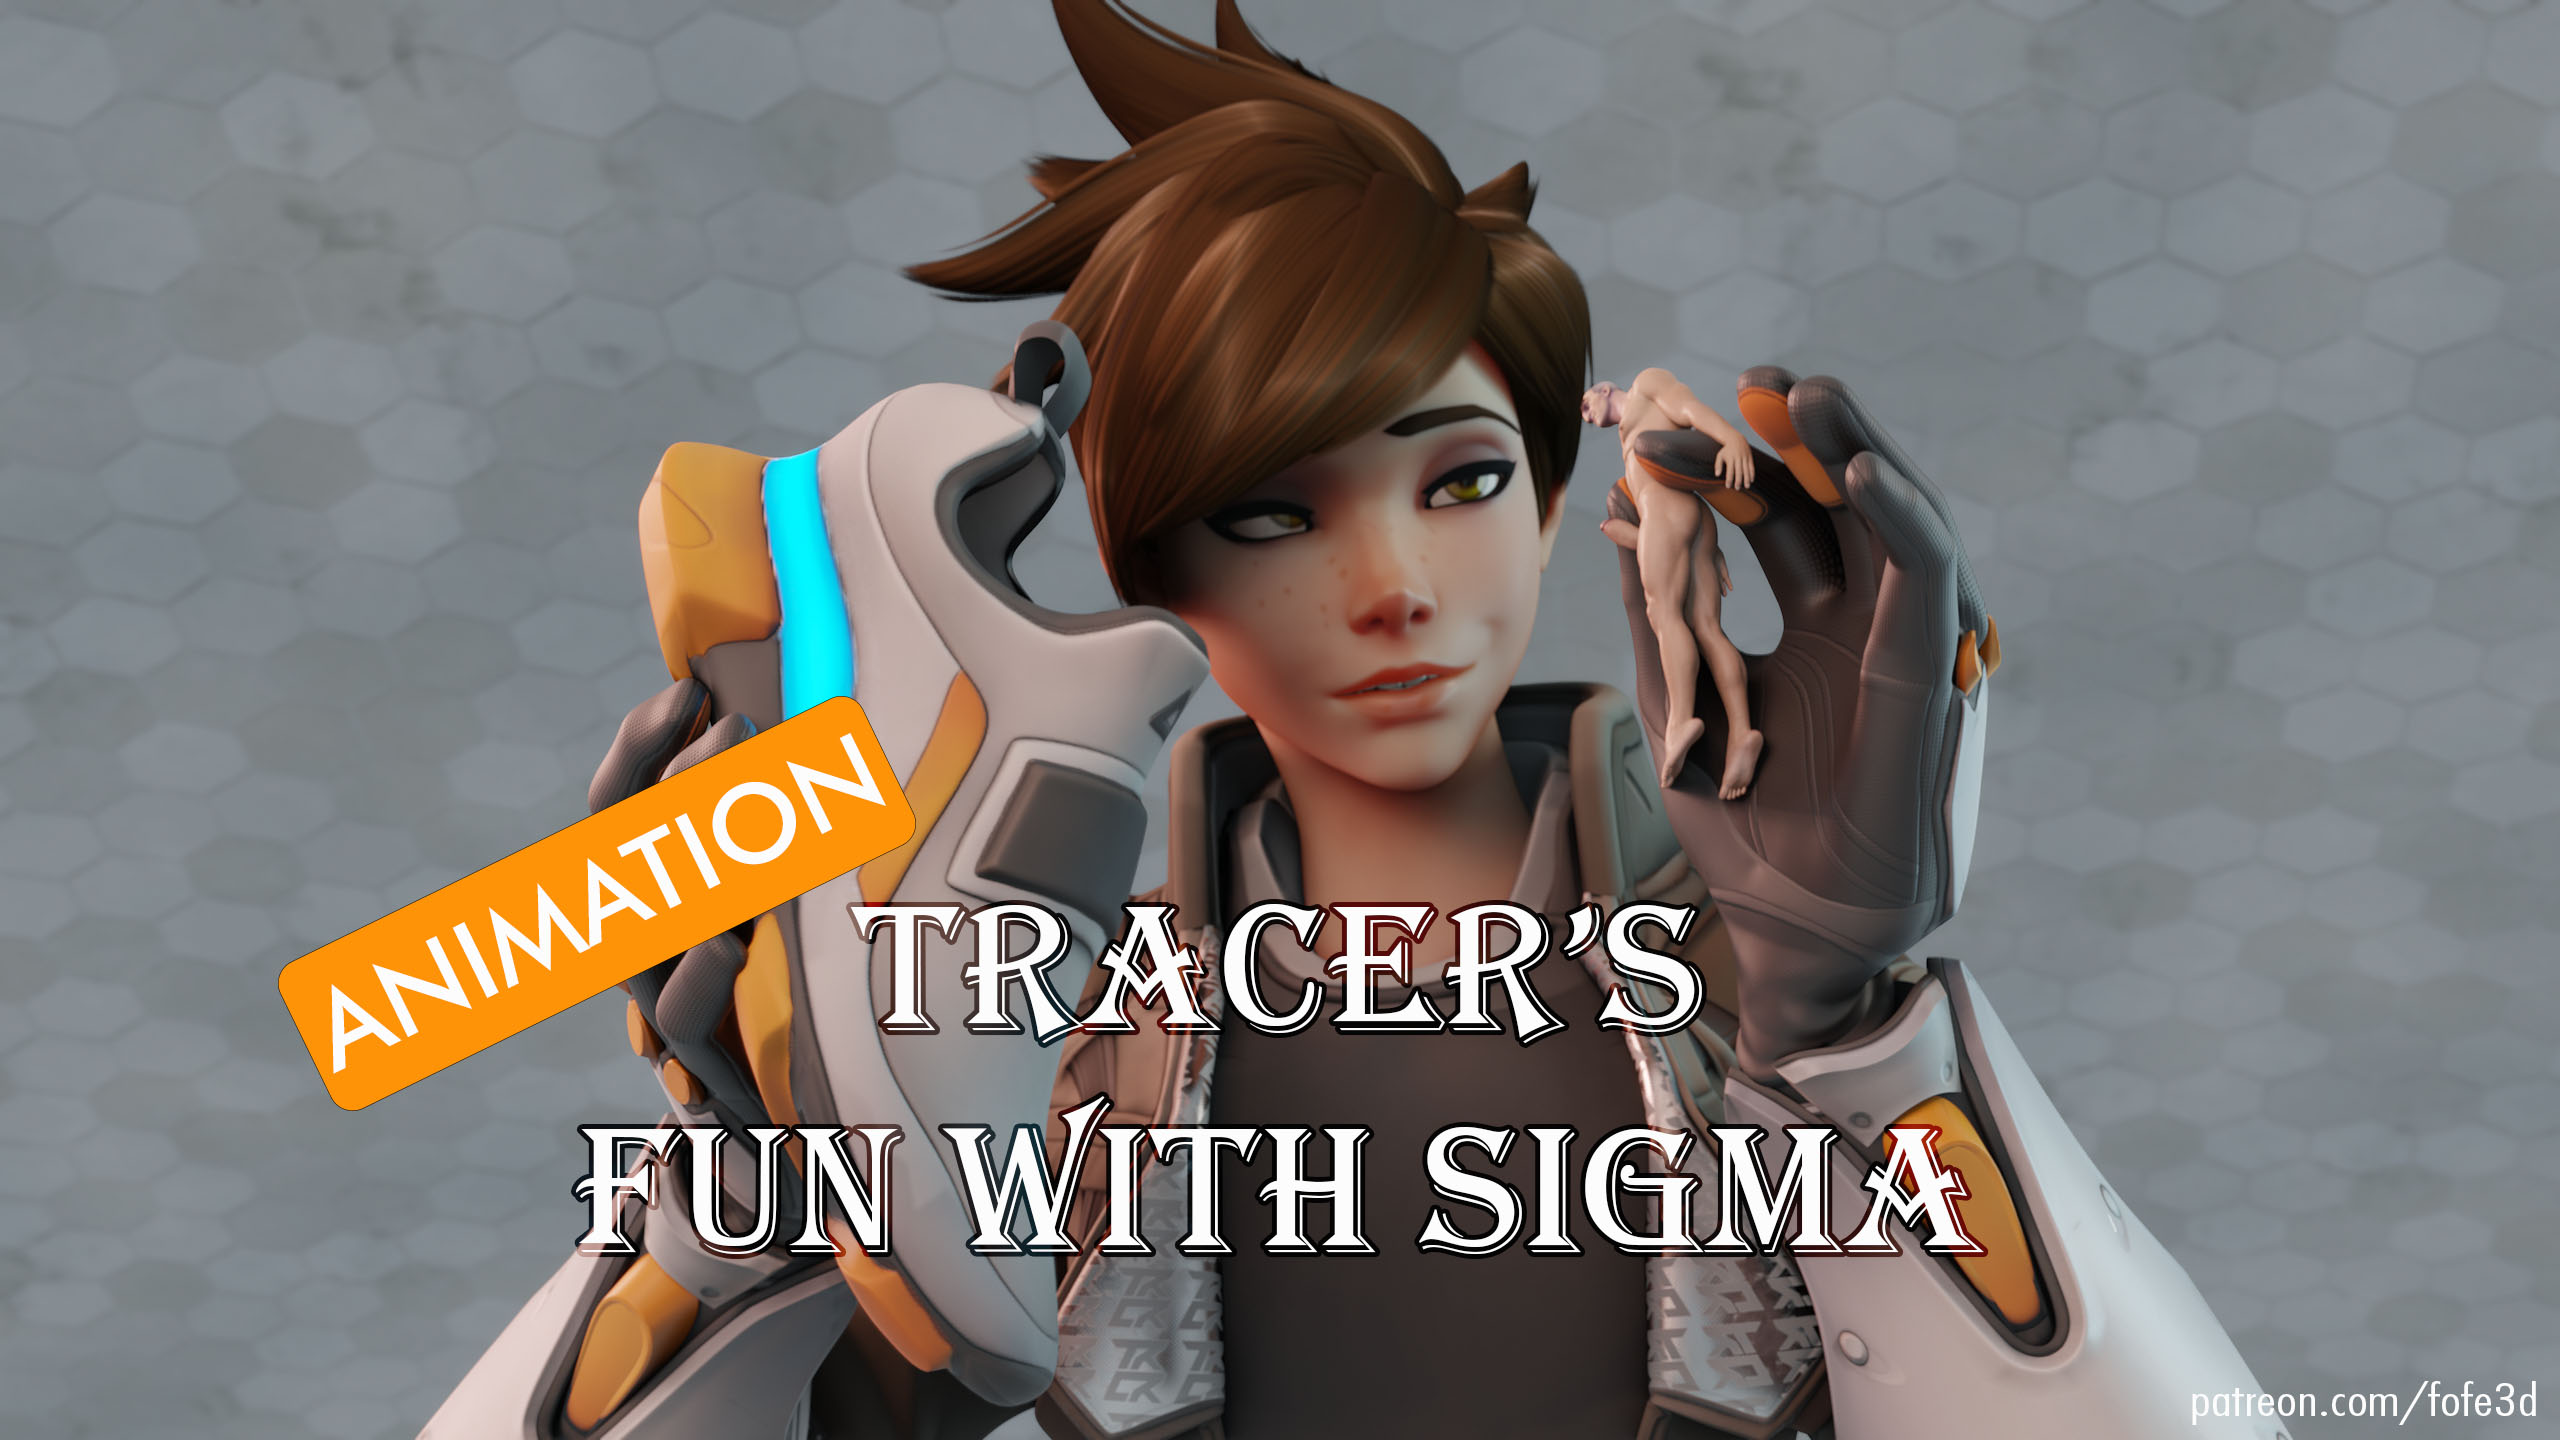 Tracer Fun With Sigma [Animation]